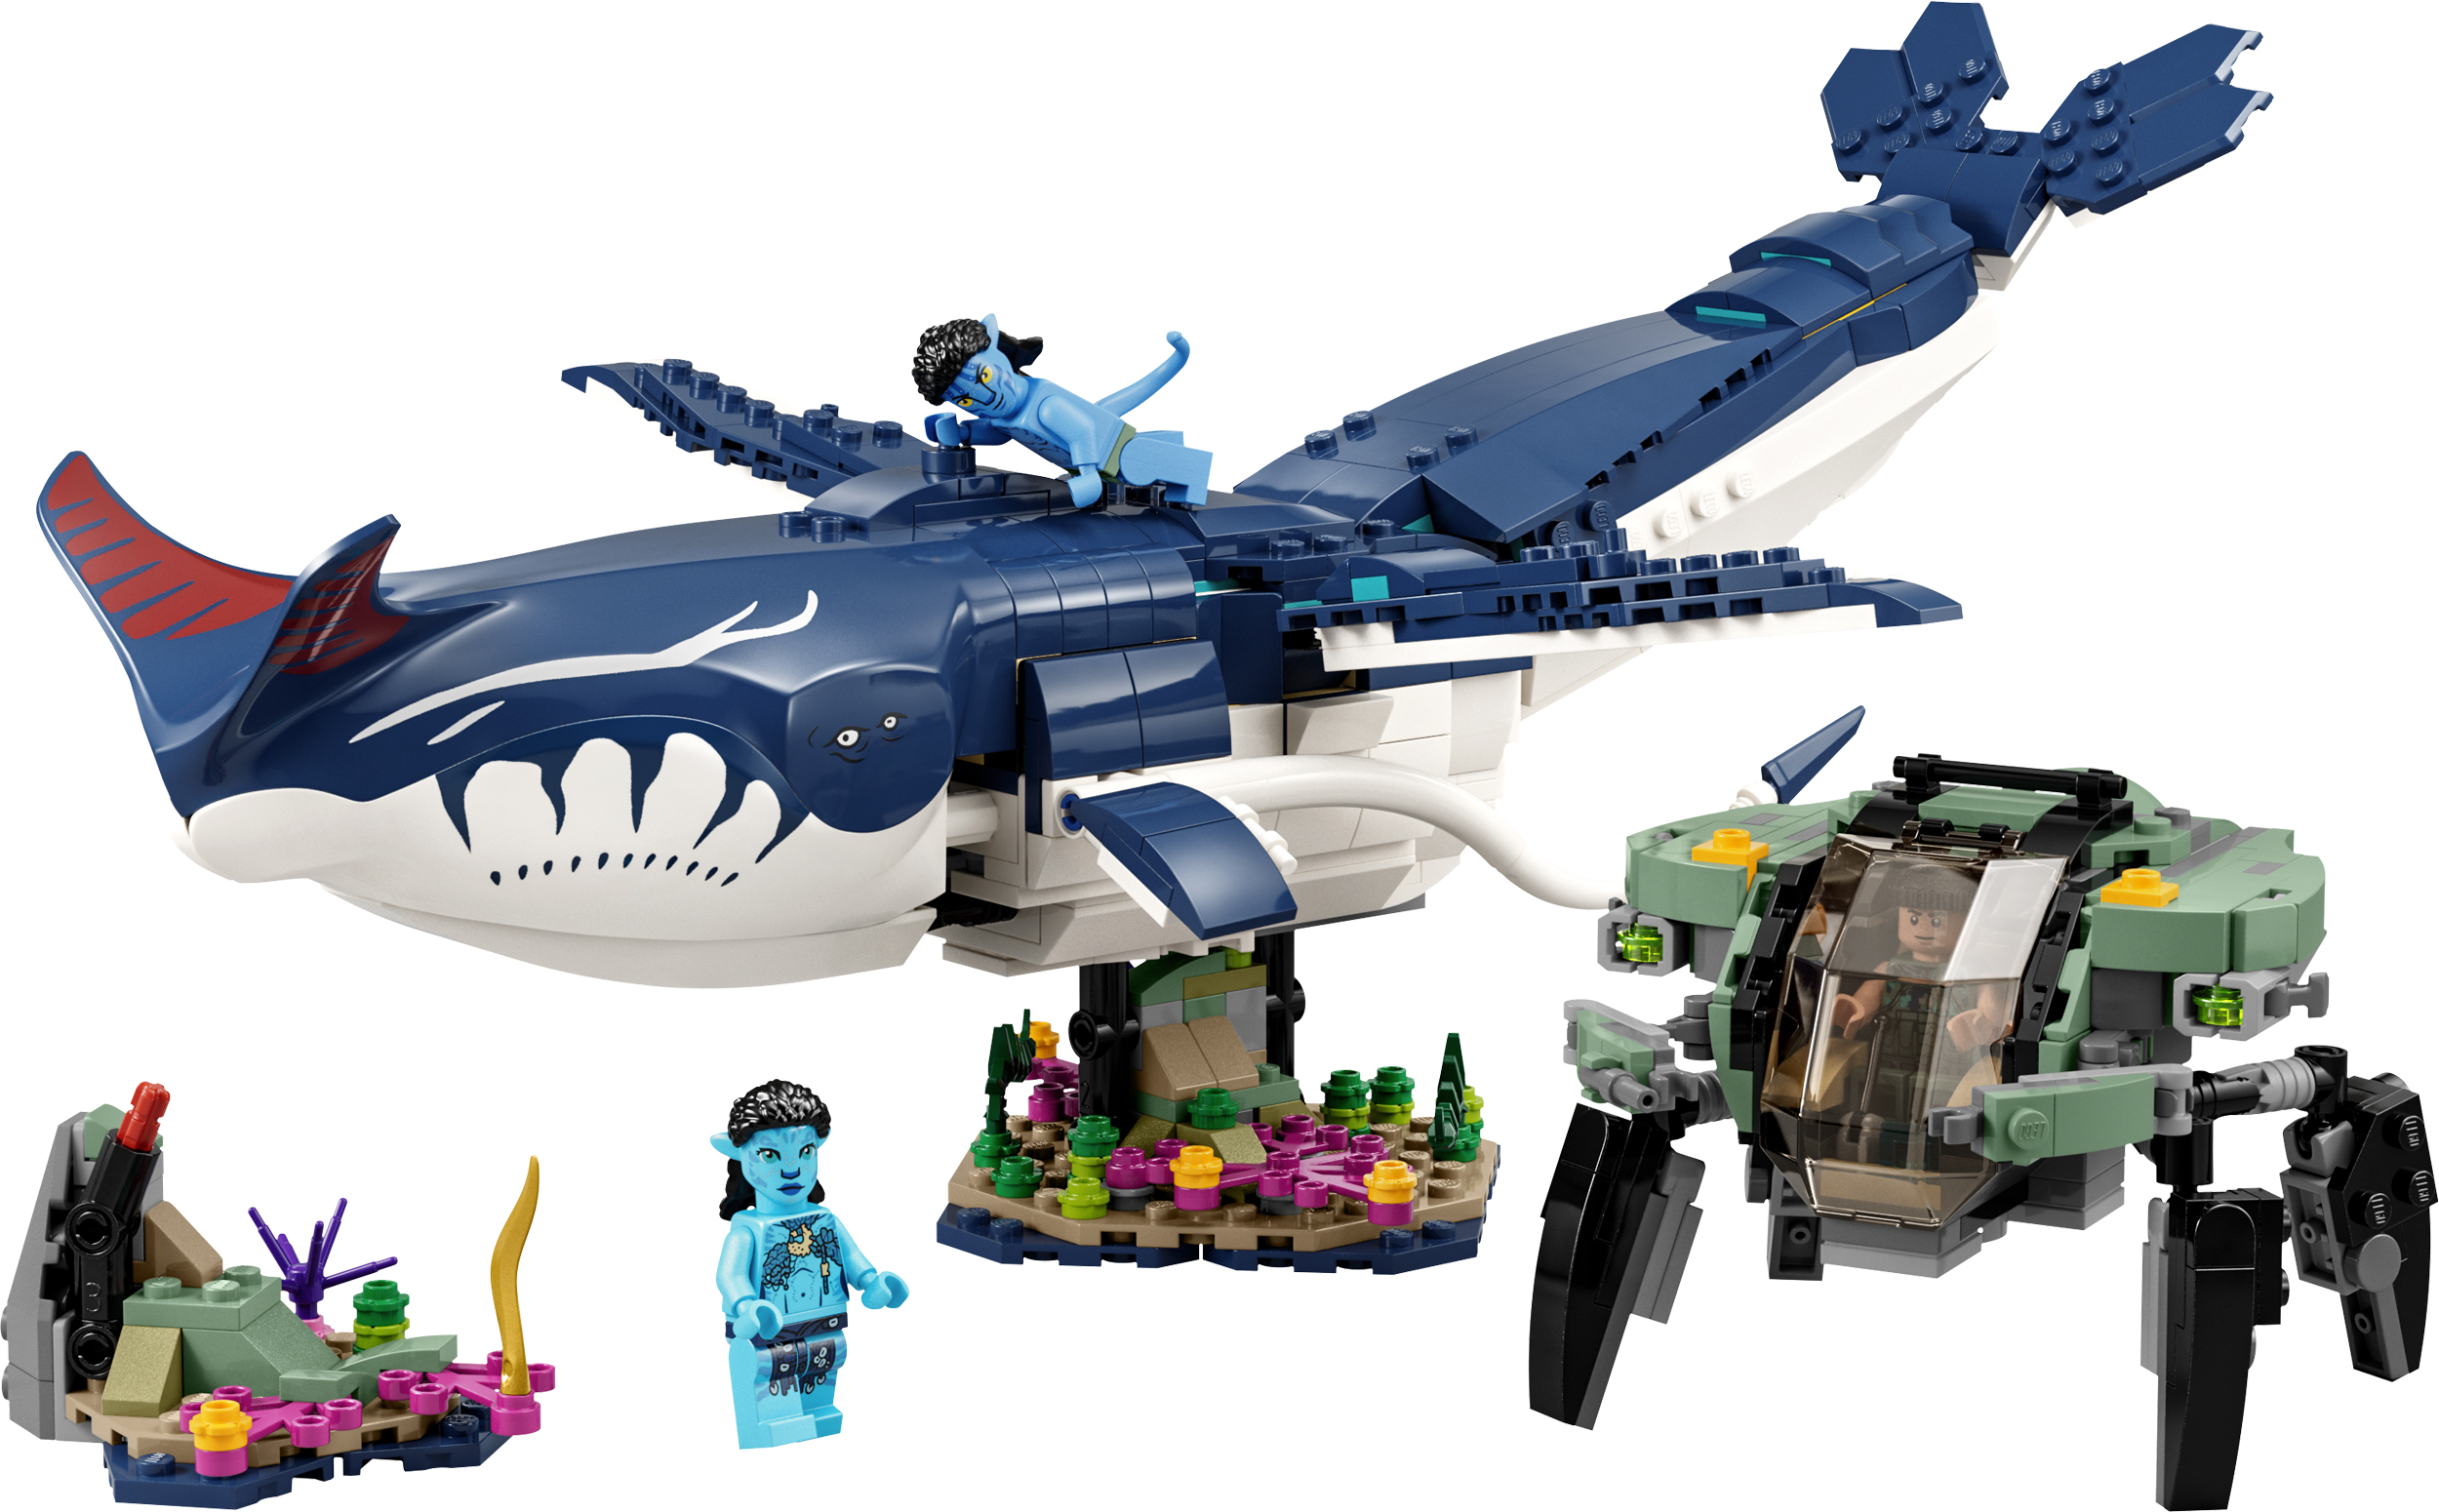 Avatar: The Way of Water Lego sets bring Pandora into your home